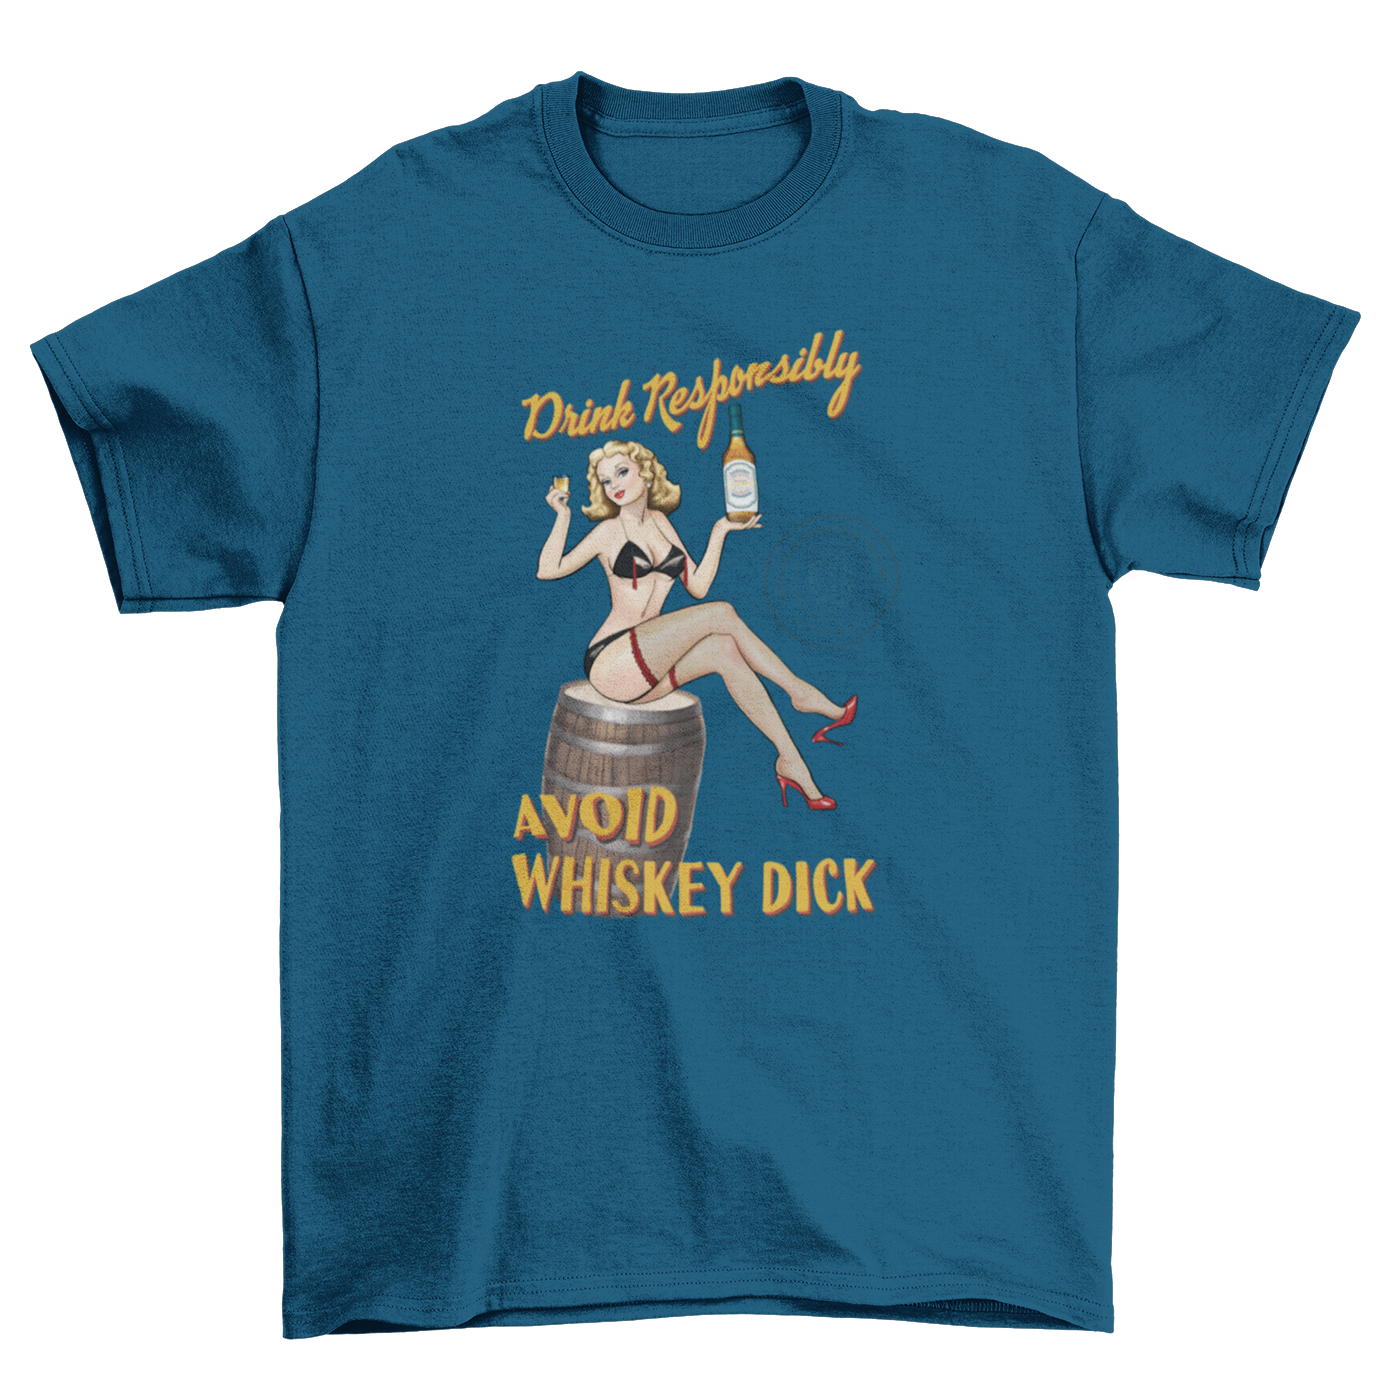 Drink Responsibly... Avoid Whiskey Dick T-Shirt on Steel Blue